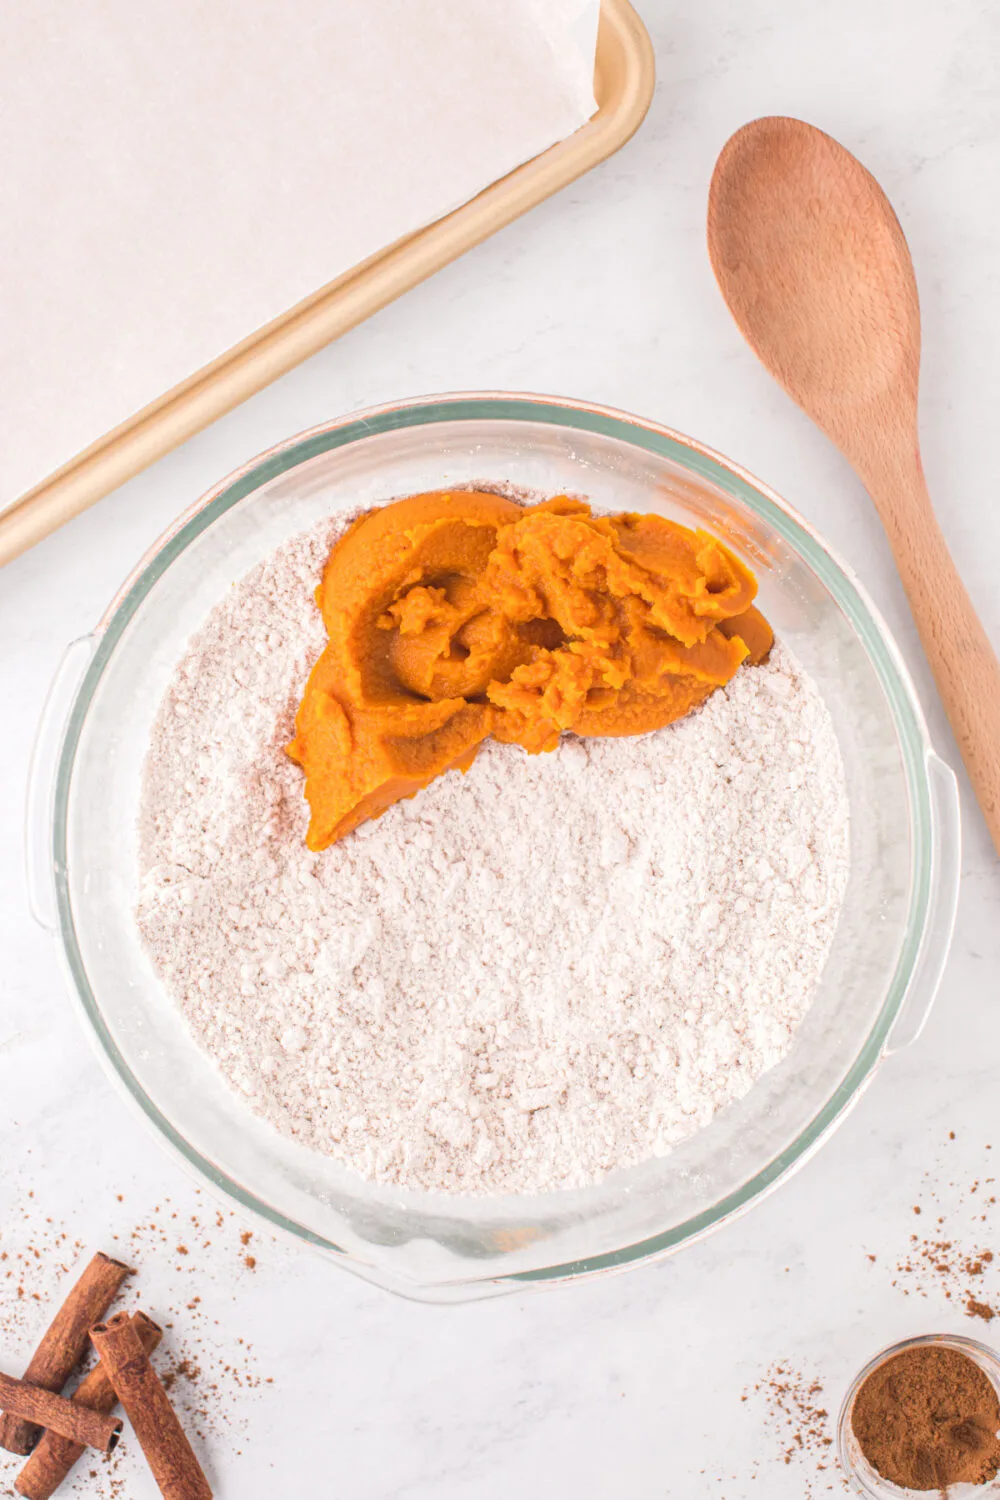 Pumpkin puree in a bowl of dry mix.